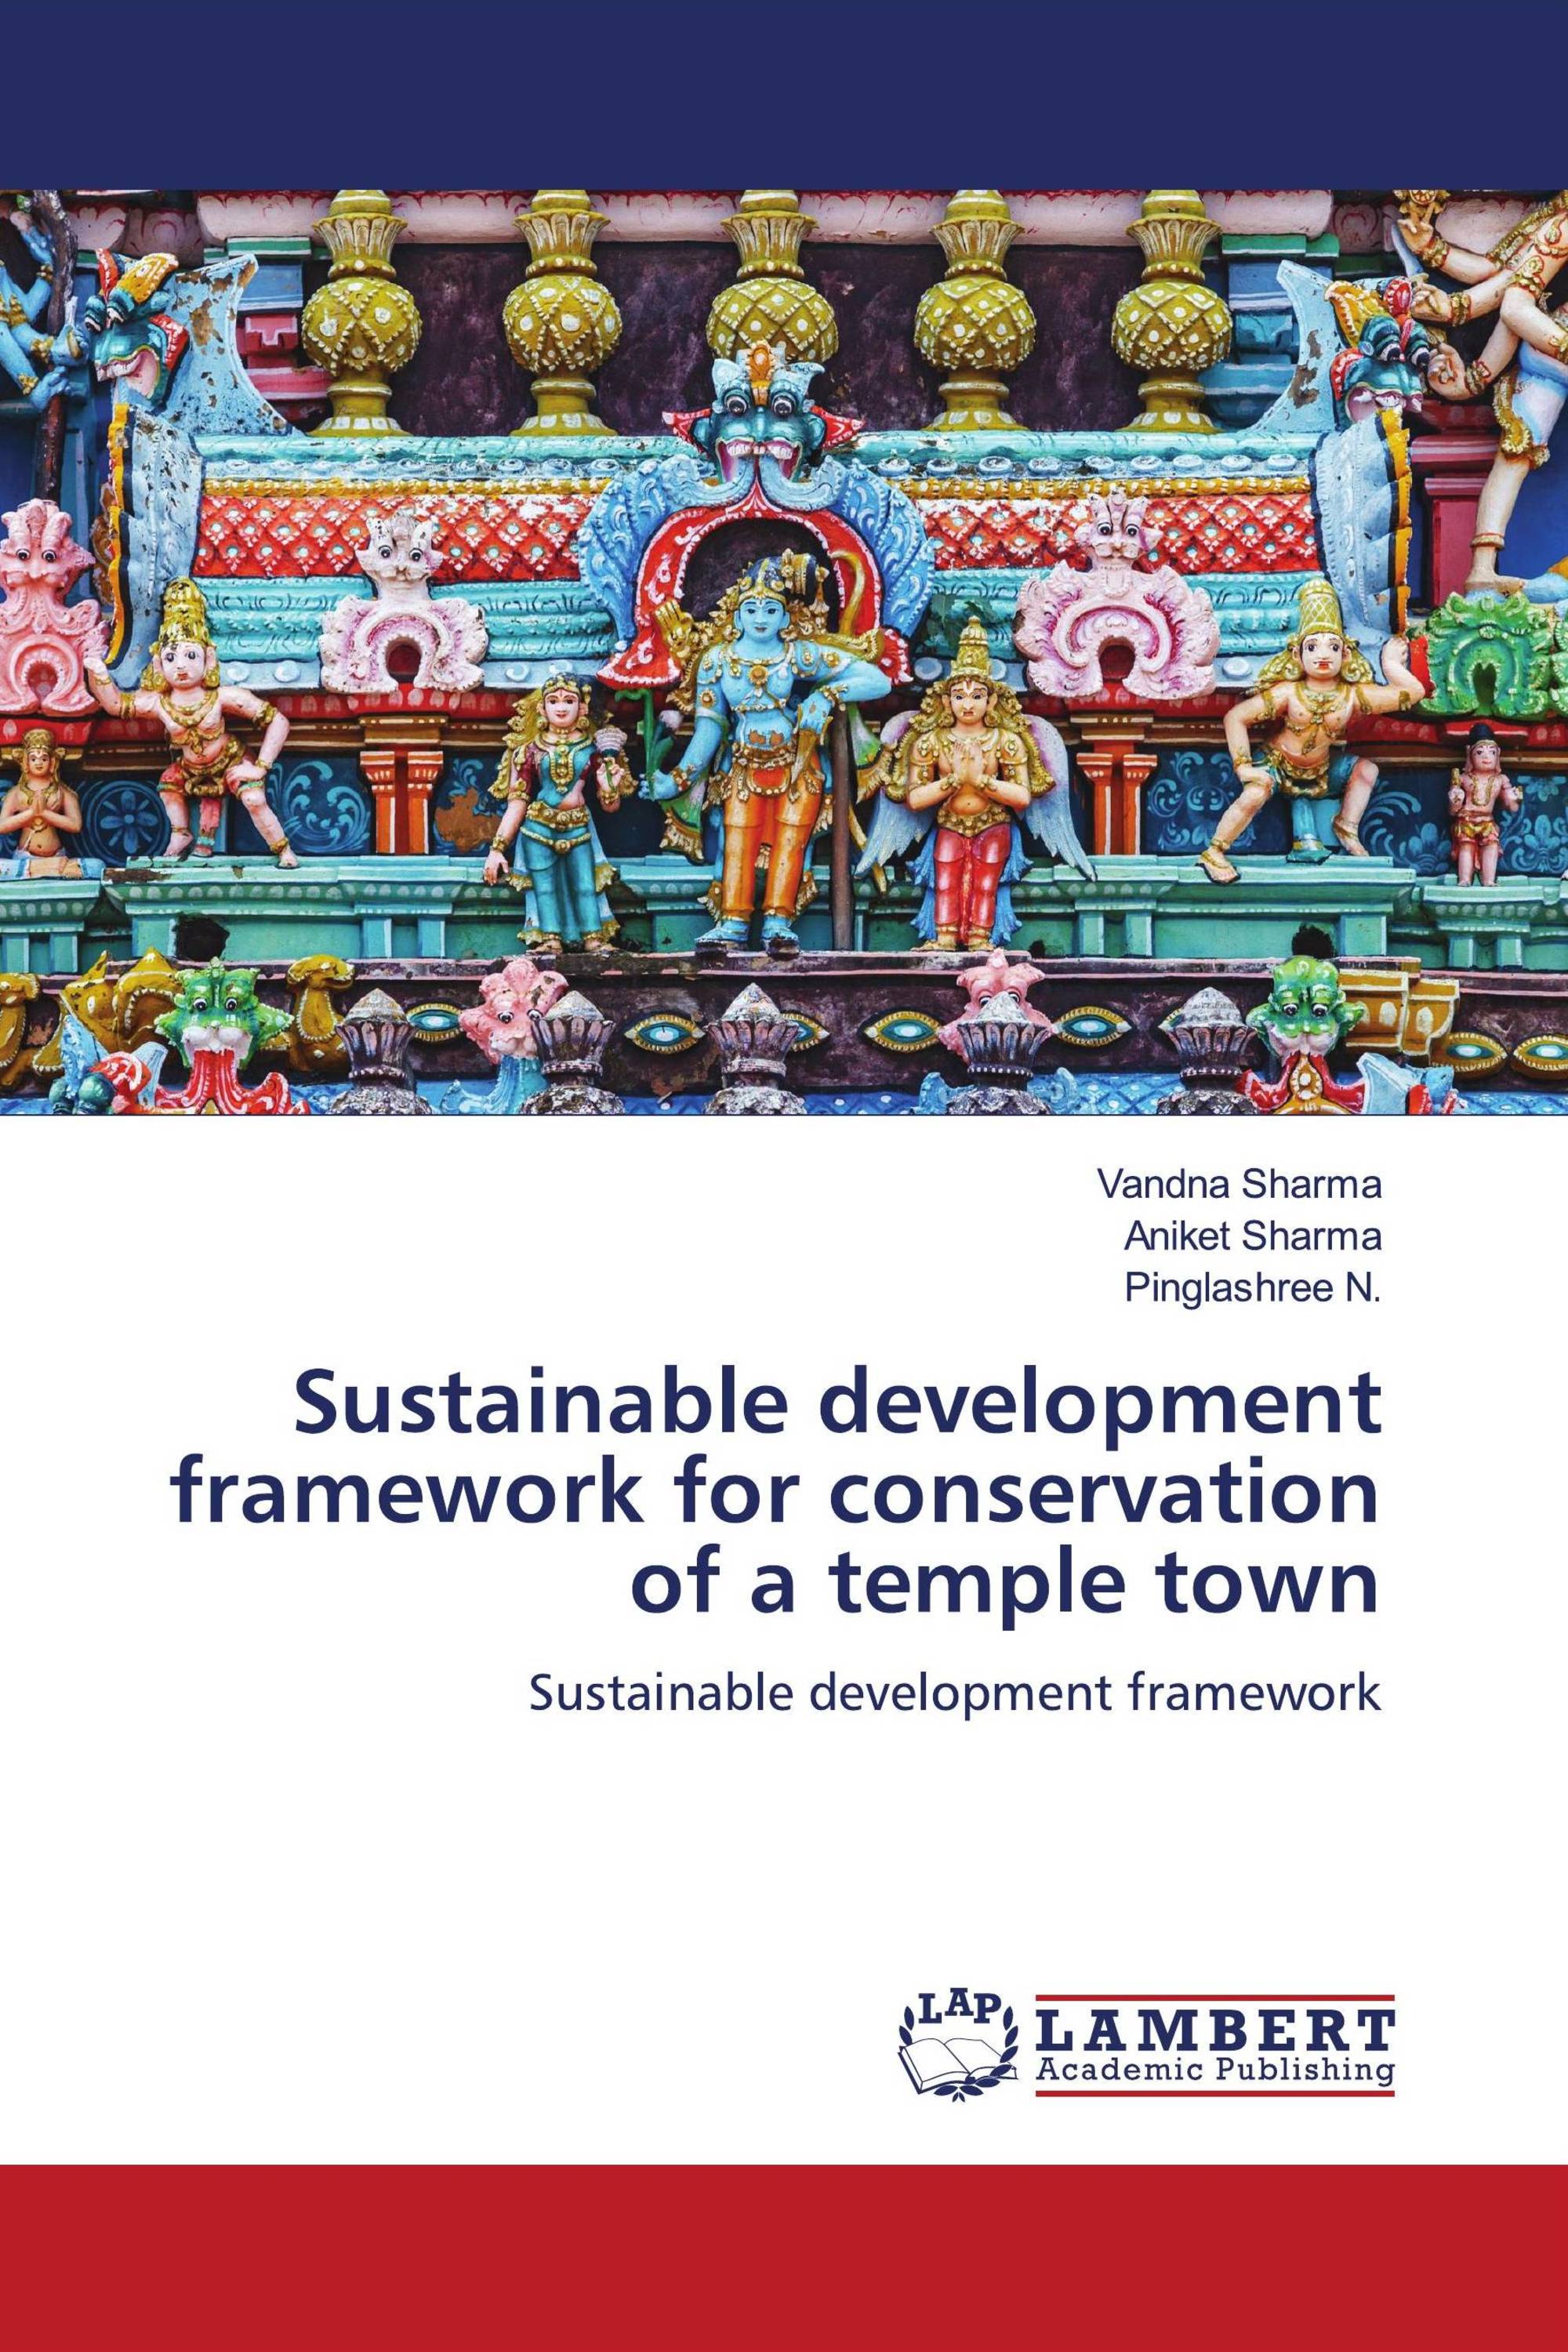 Sustainable development framework for conservation of a temple town